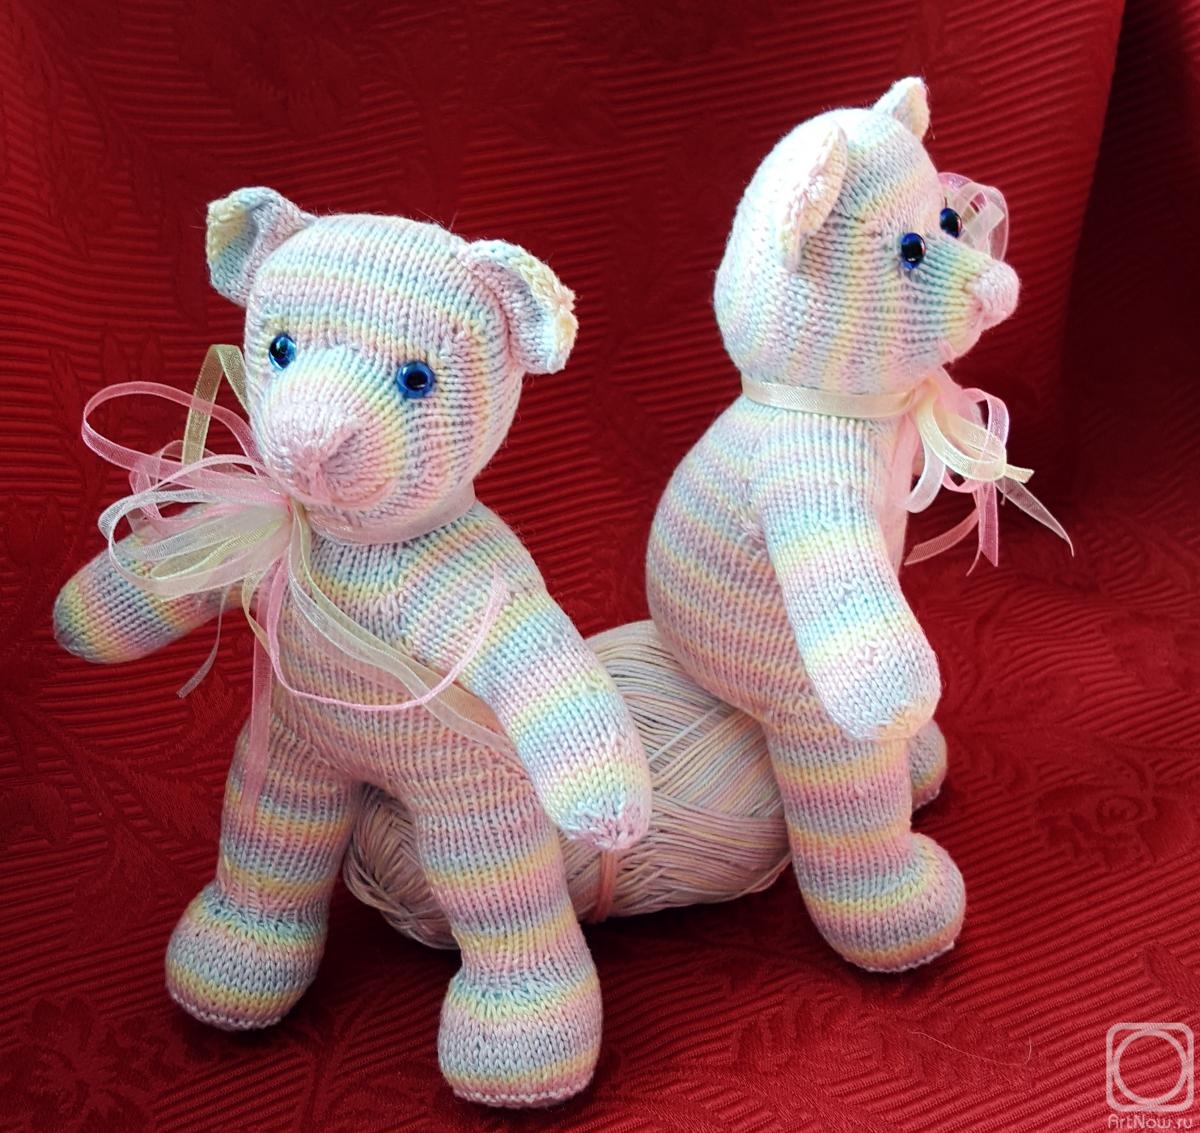 Repnikova Svetlana. Mini Turnip Bears are iridescent. Two from the casket are the same from the face!